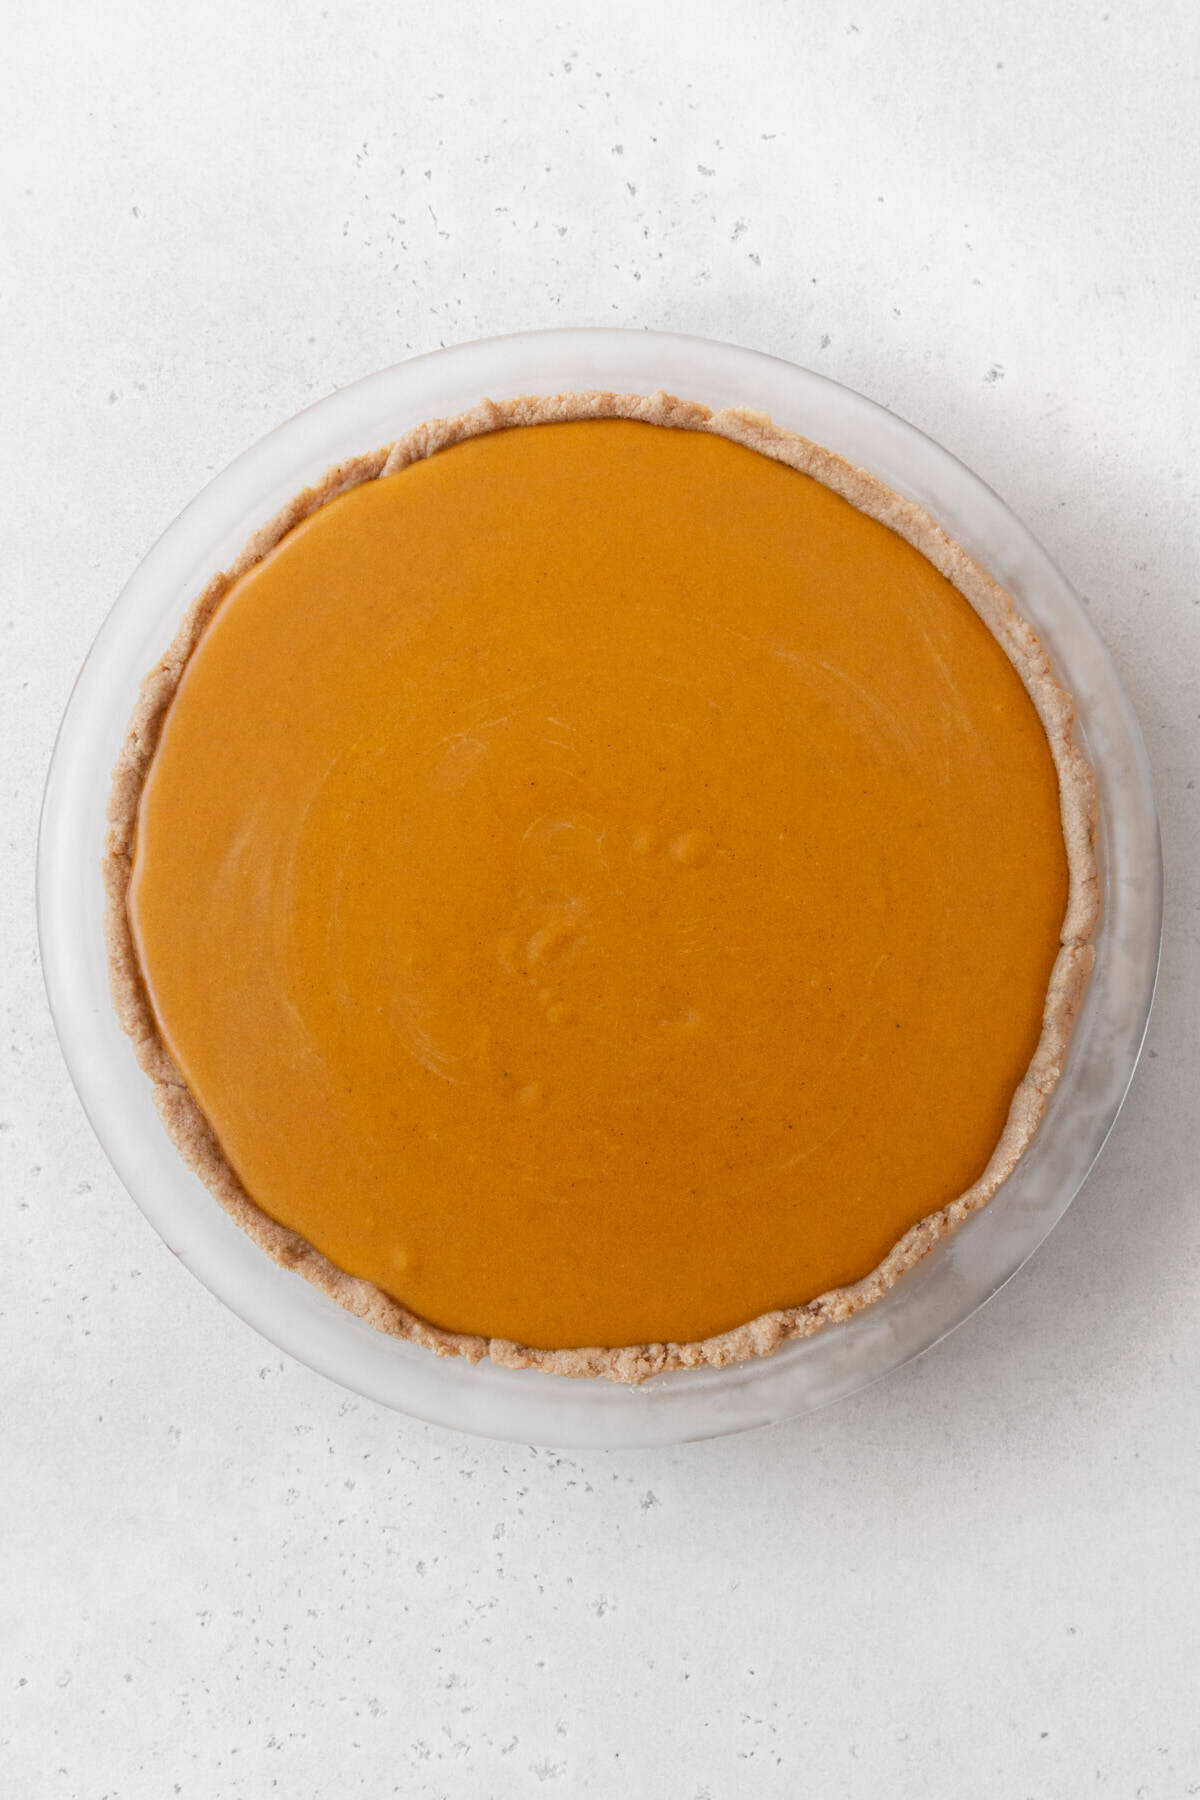 Eggless pumpkin pie before baking in the oven.